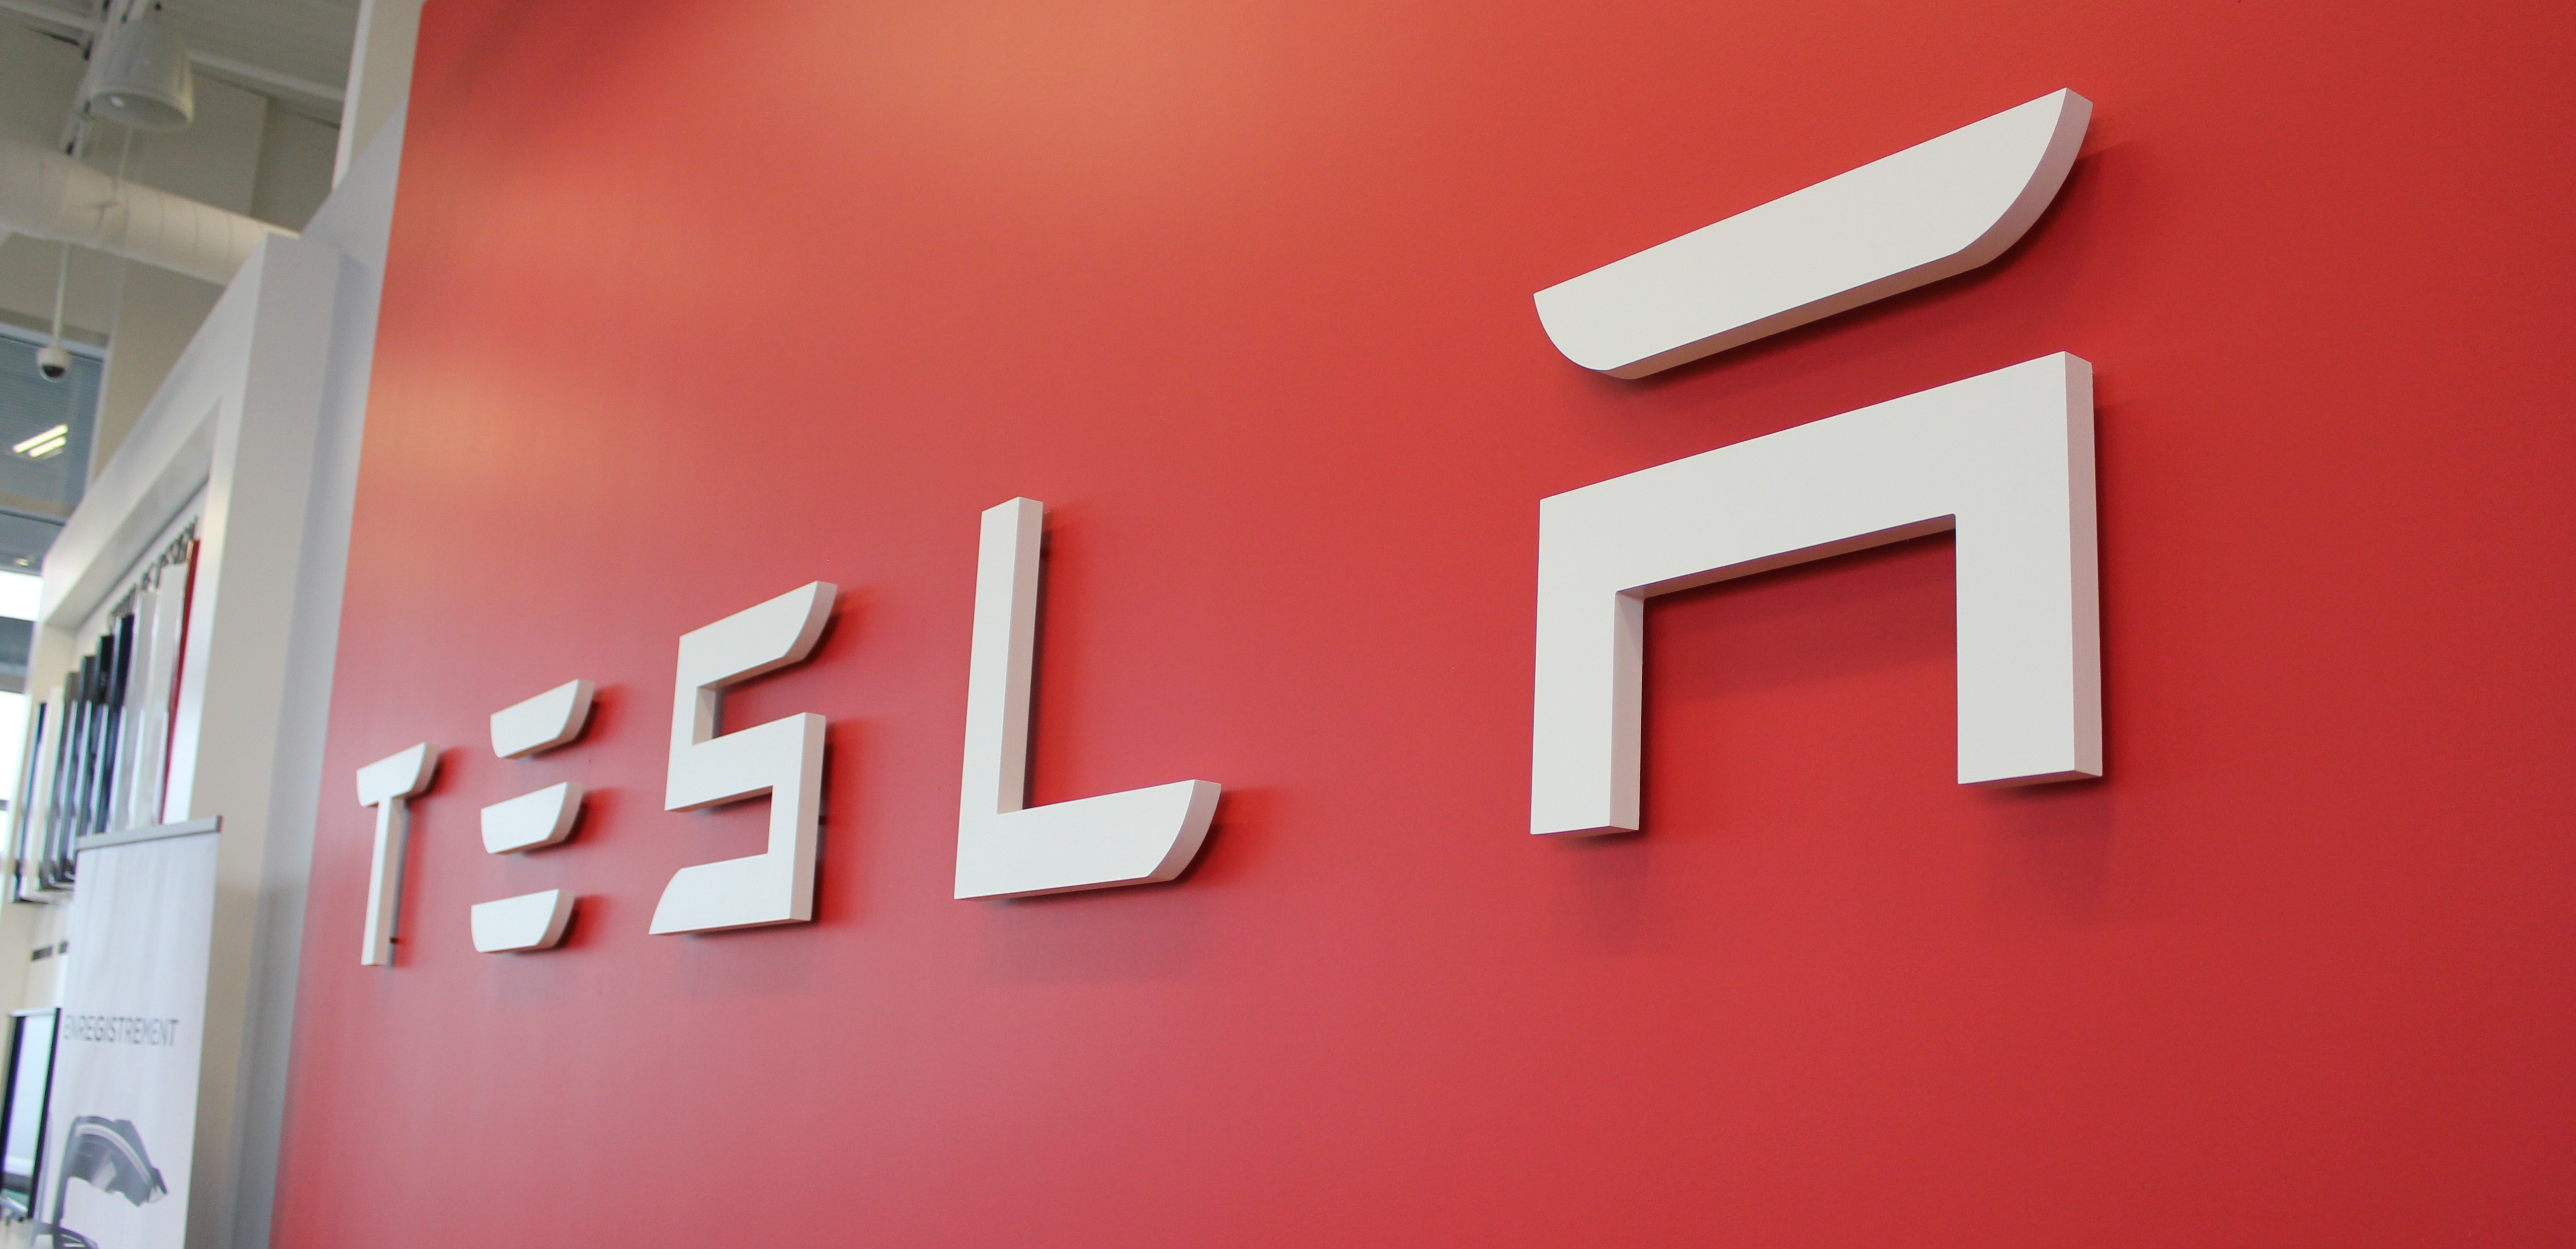 Tesla (TSLA) files cap raise up to $2.3B, CEO Elon Musk in for $10M